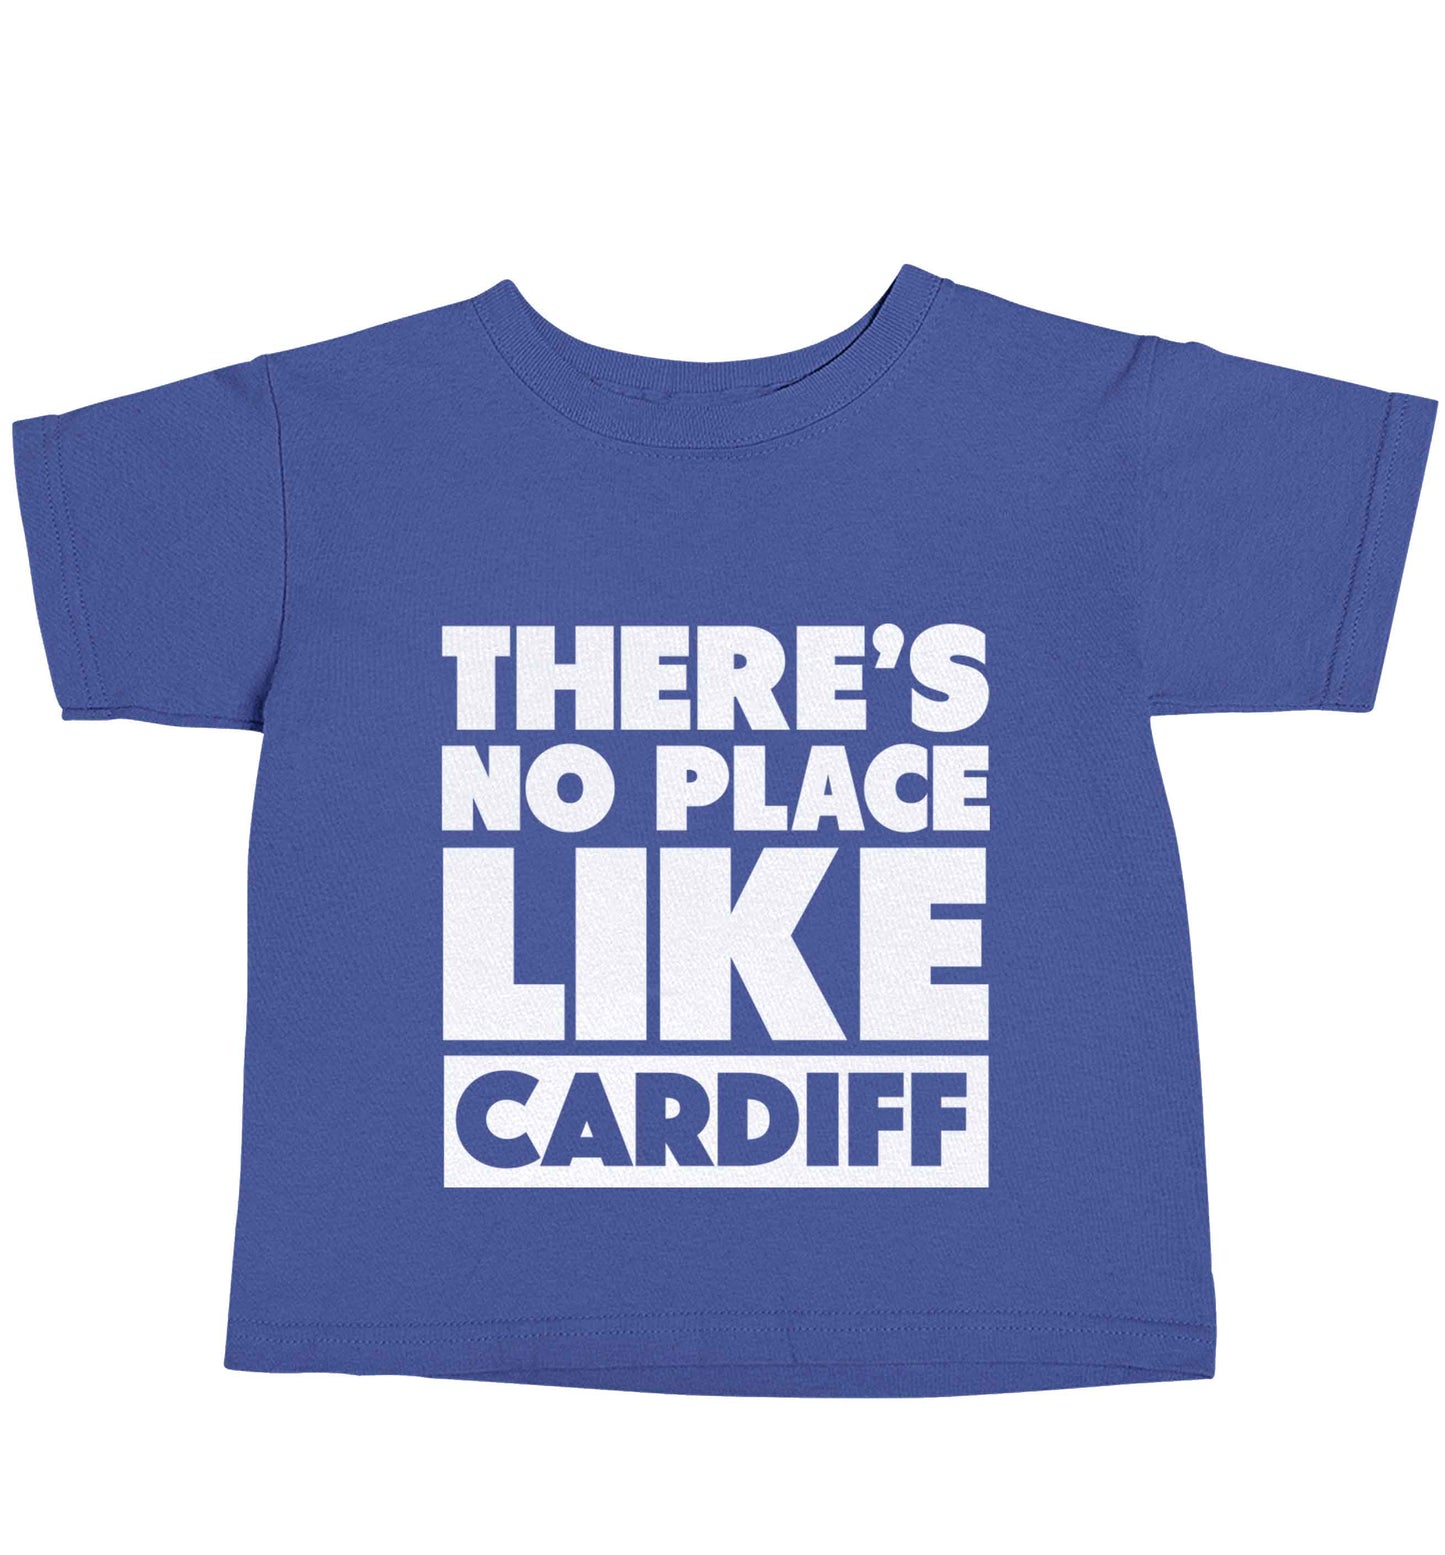 There's no place like Cardiff blue baby toddler Tshirt 2 Years